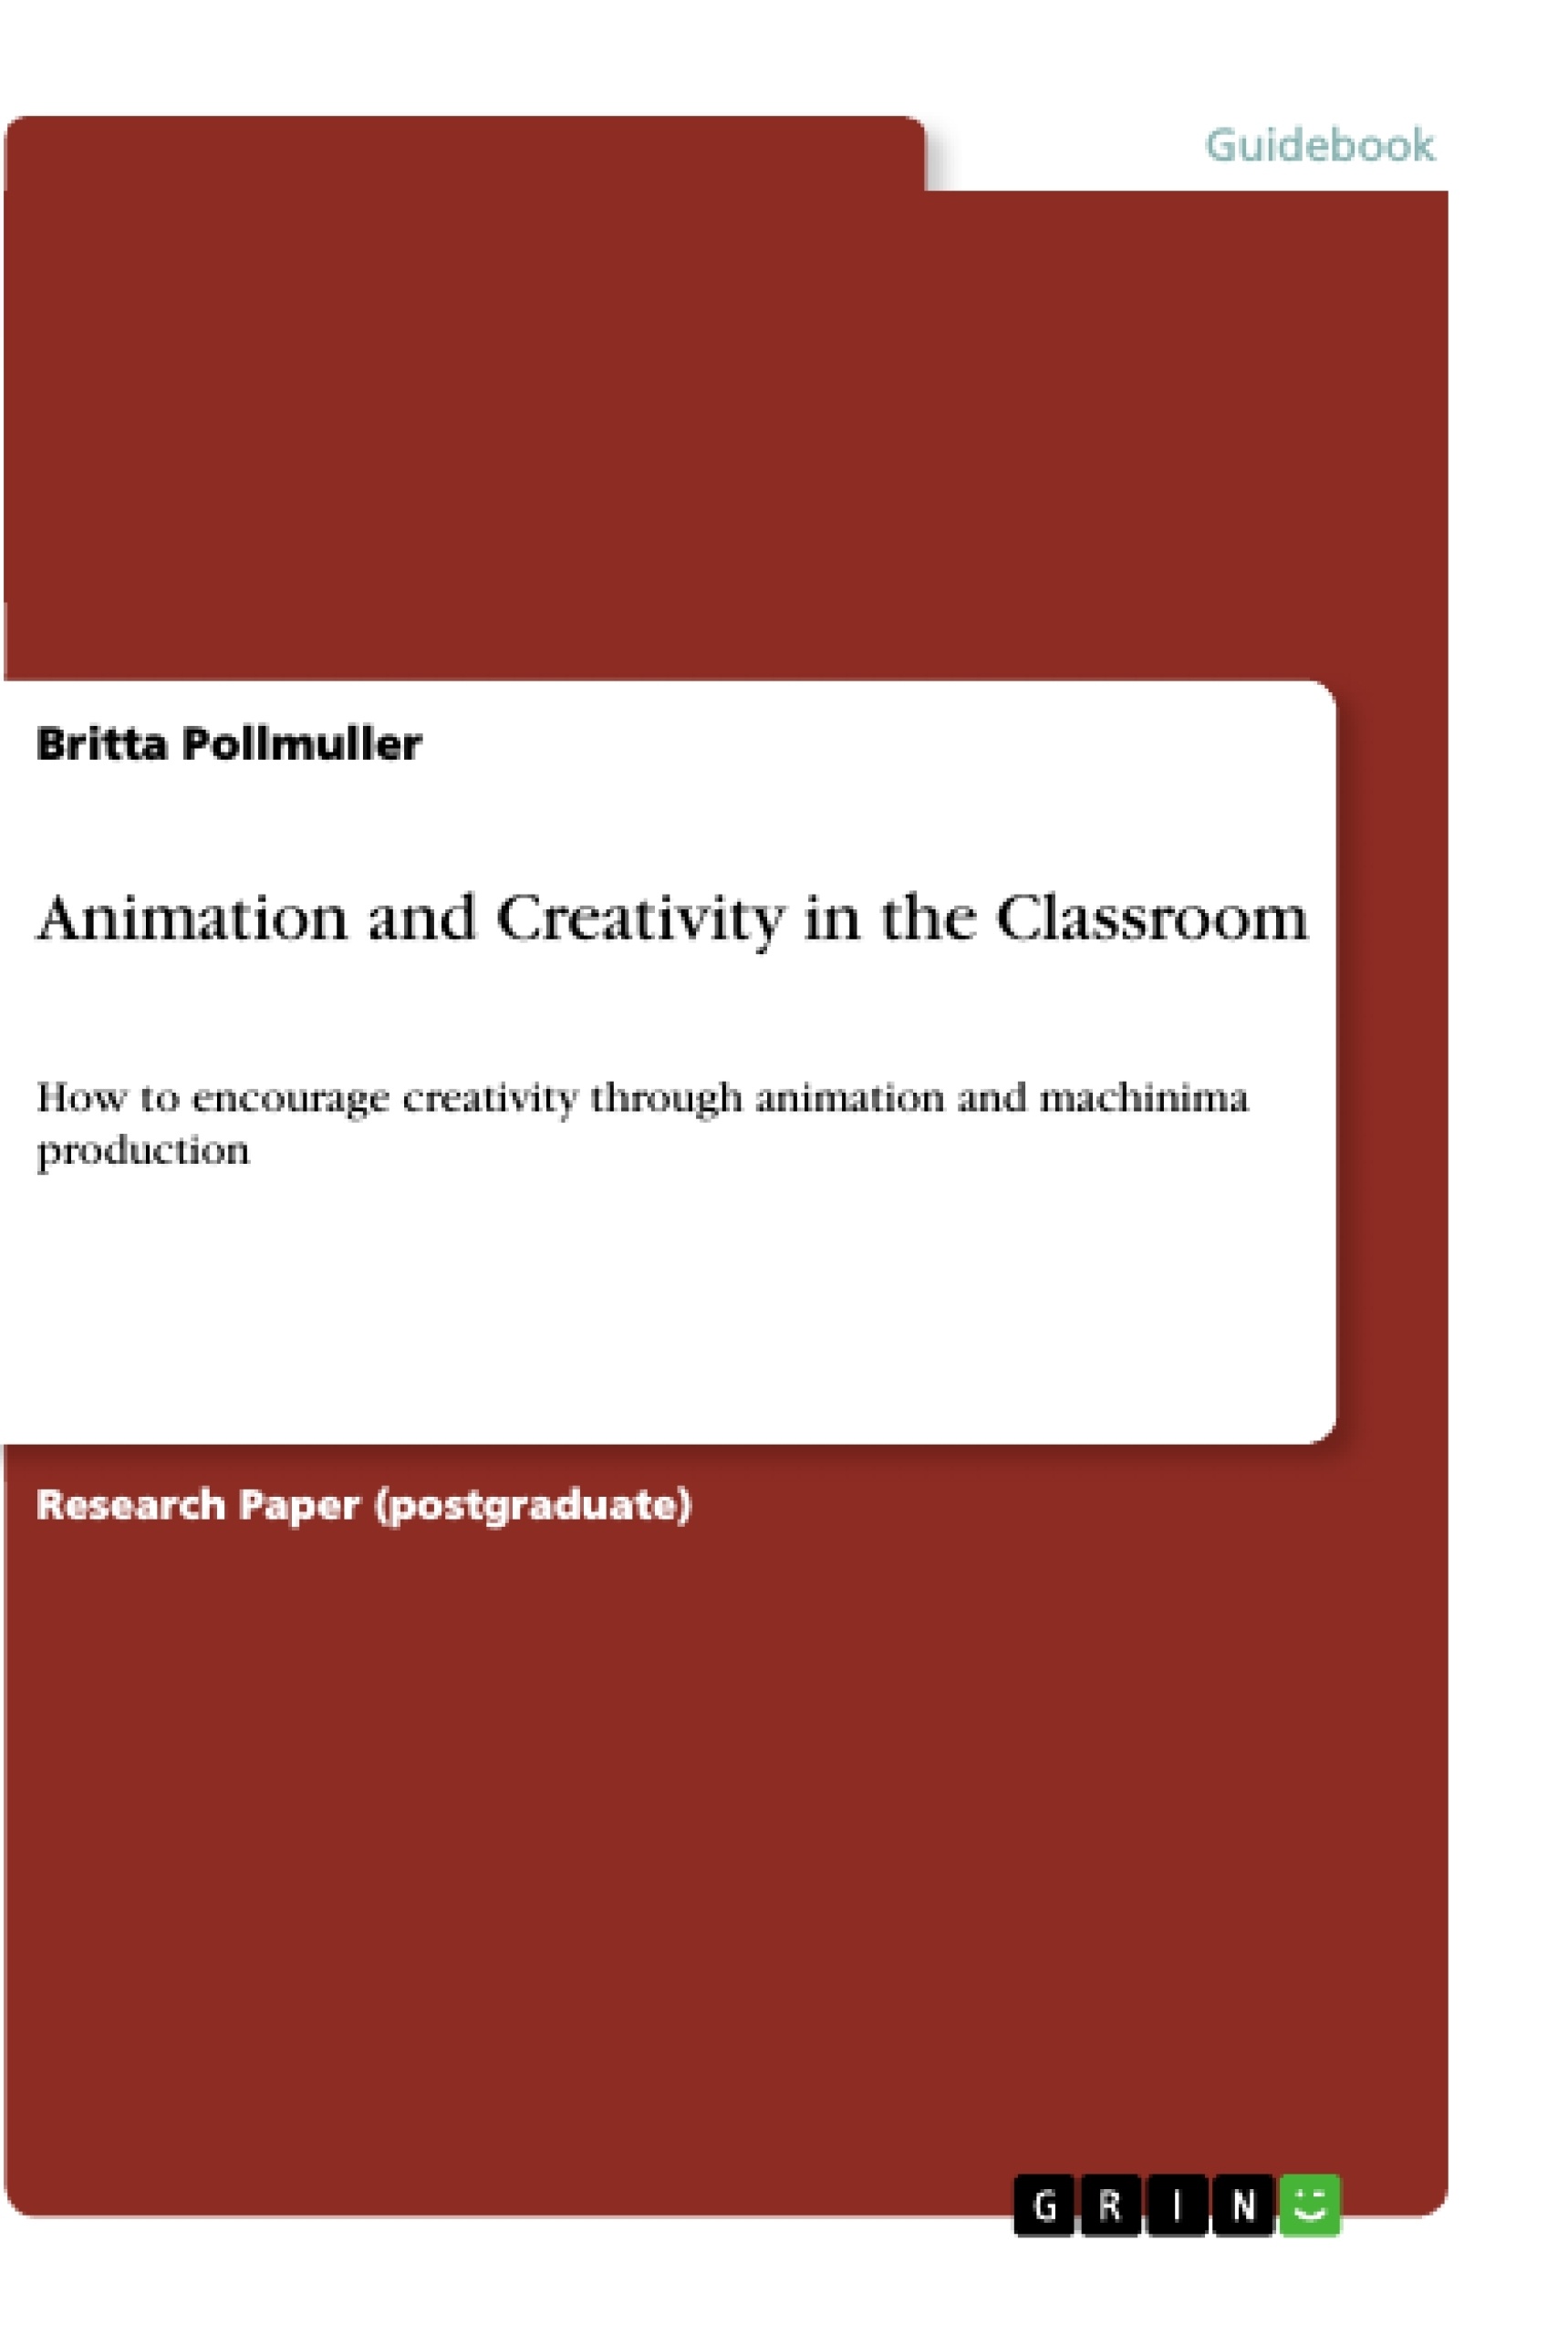 Animation and Creativity in the Classroom - GRIN